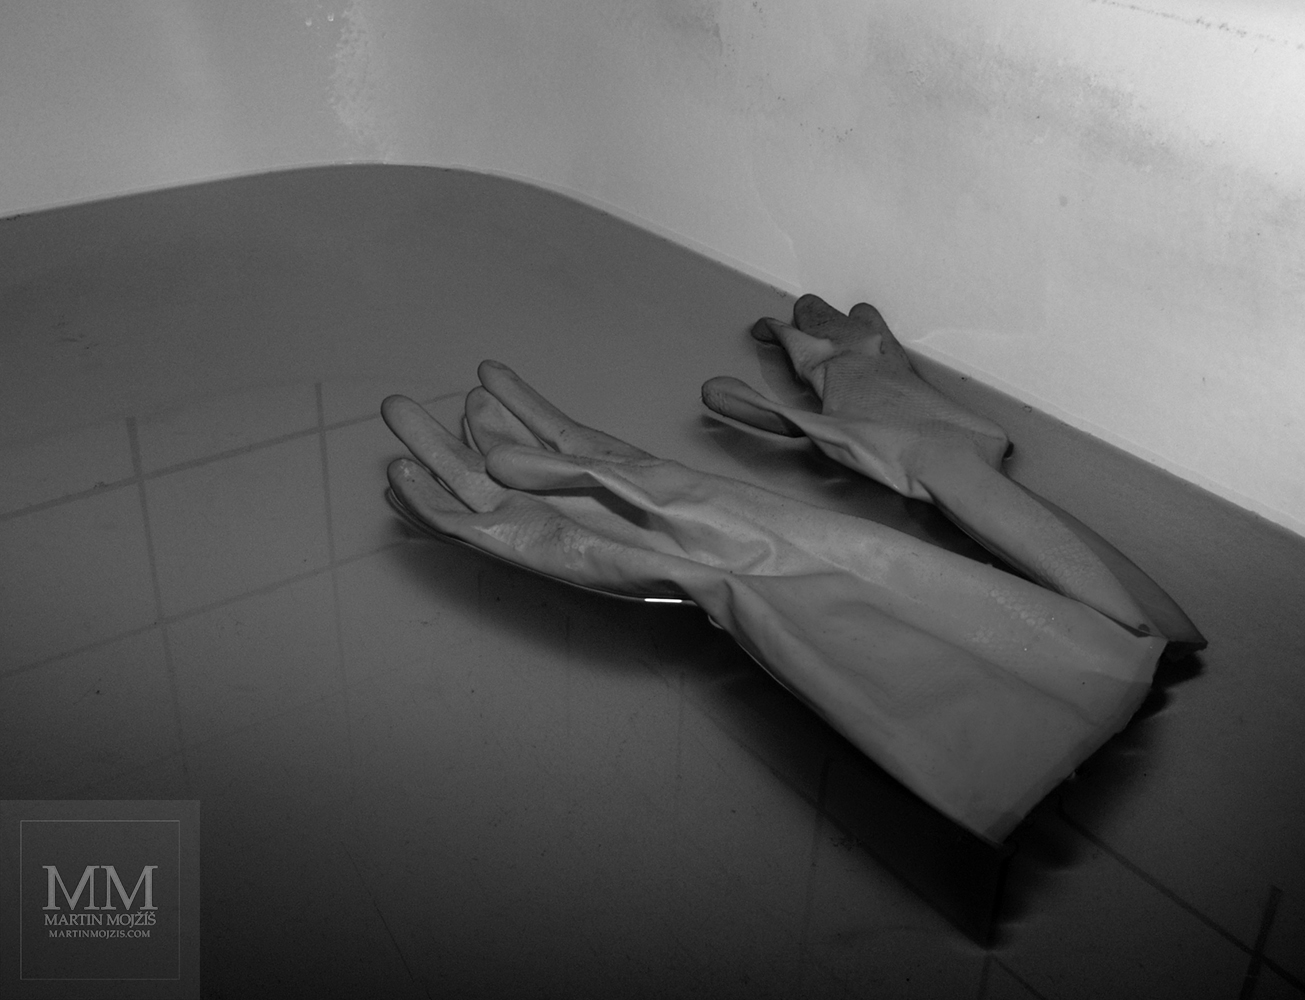 Rubber gloves floating on the water surface in the tub. Photograph with the title FLOATING.